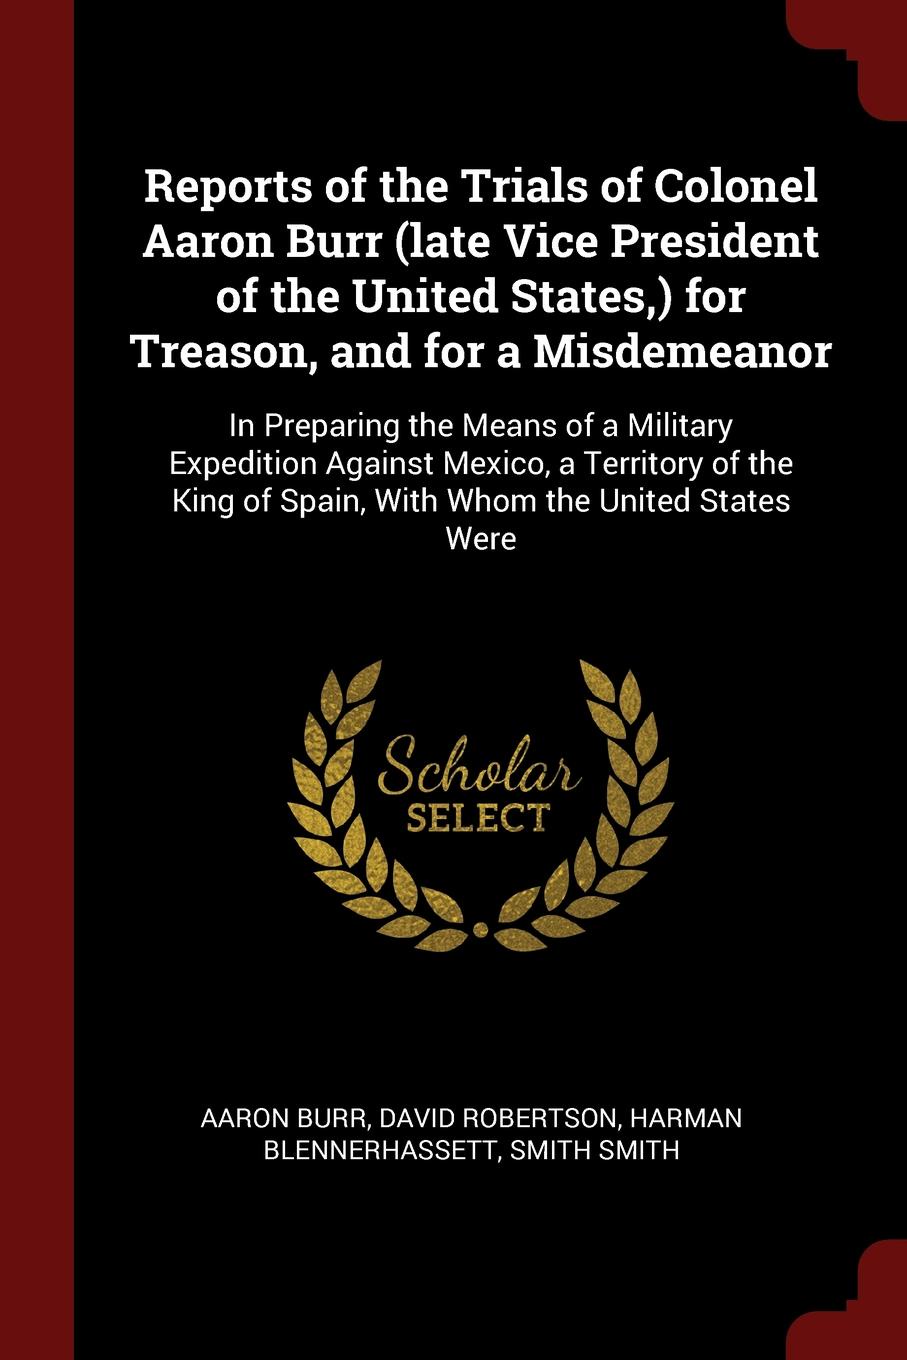 Reports of the Trials of Colonel Aaron Burr (late Vice President of the United States,) for Treason, and for a Misdemeanor. In Preparing the Means of a Military Expedition Against Mexico, a Territory of the King of Spain, With Whom the United Stat...